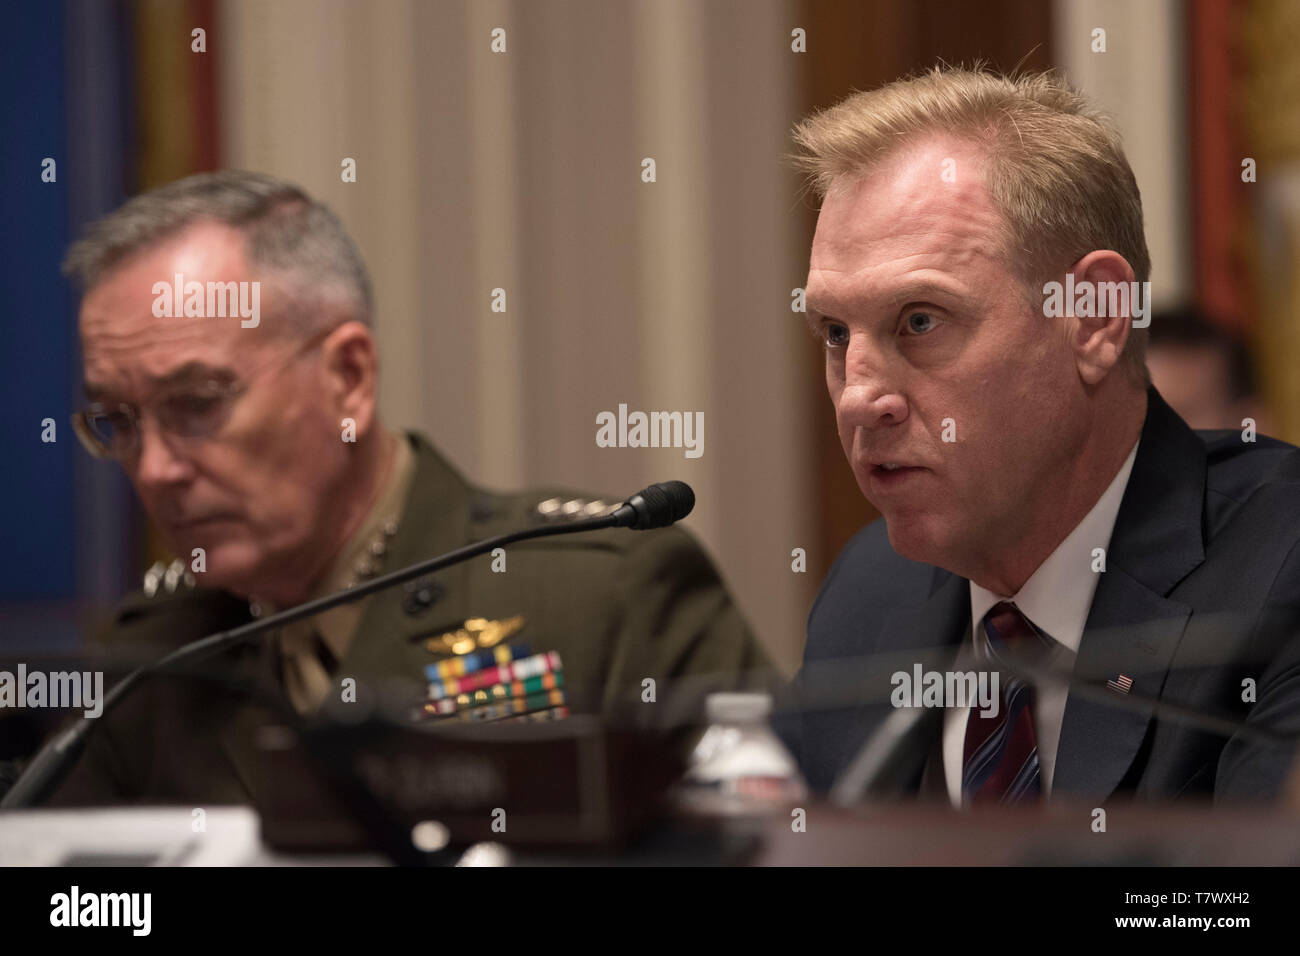 U.S. Acting Secretary of Defense Patrick M. Shanahan testifies before the Senate Appropriations Defense Subcommittee on the fiscal year 2020 Department of Defense budget request, Washington, D.C., May 8, 2019. (DoD photo by Lisa Ferdinando) Stock Photo